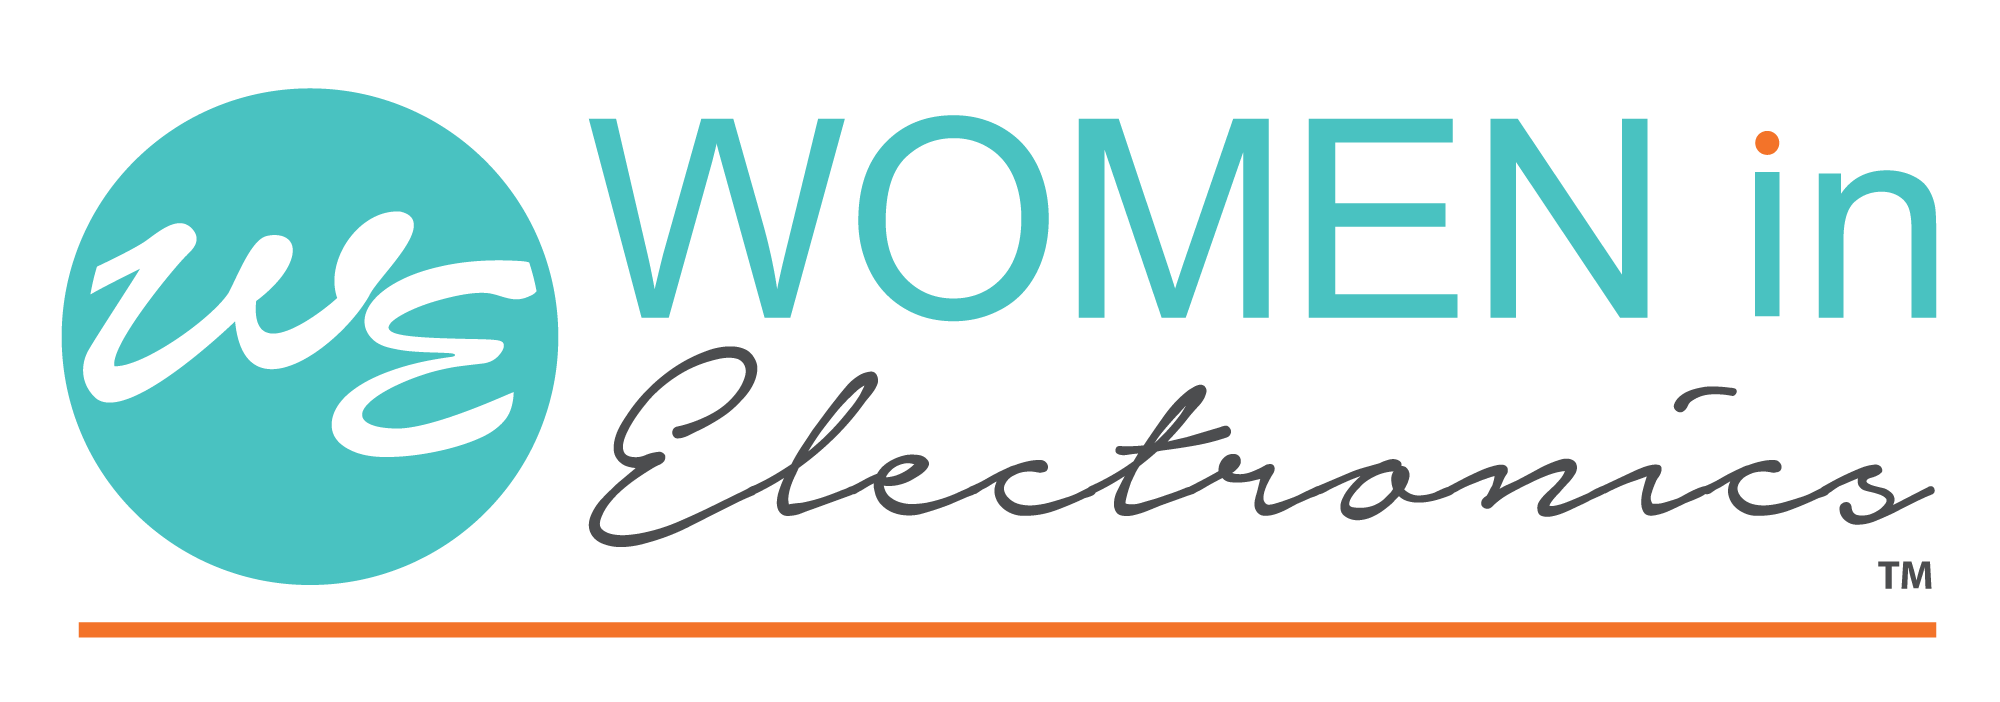 Welcome to Women in Electronics Community